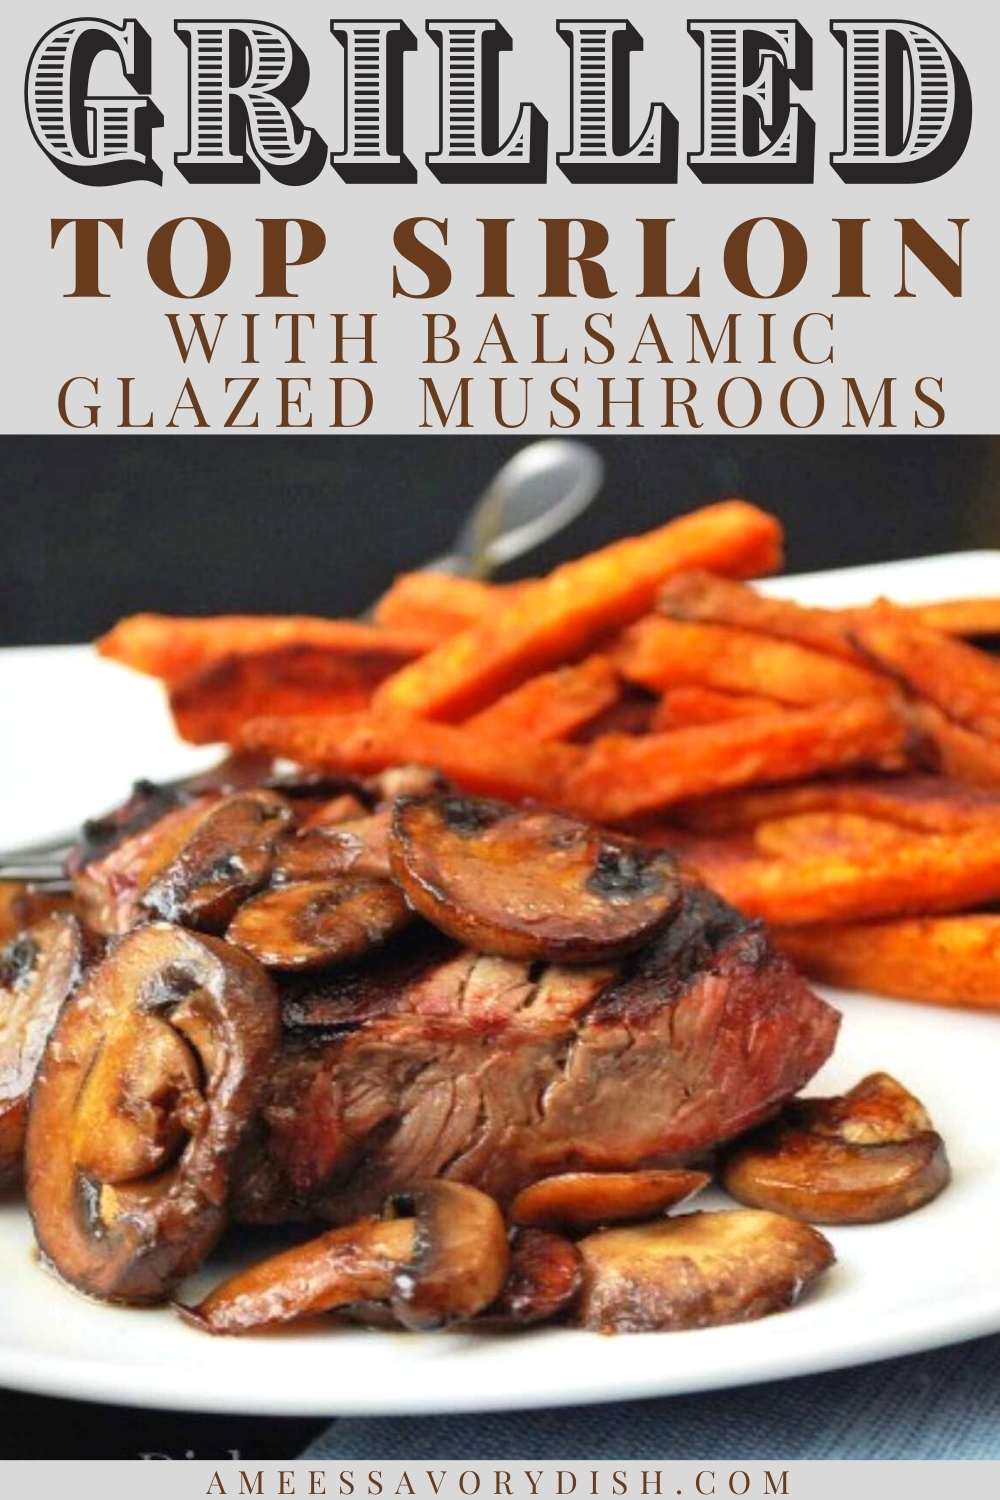 This simple recipe for Grilled Top Sirloin with Balsamic Glazed Mushrooms is ready and on the table in less than 30 minutes. #topsirloin #grilledsteak #grilledtopsirloin via @Ameessavorydish